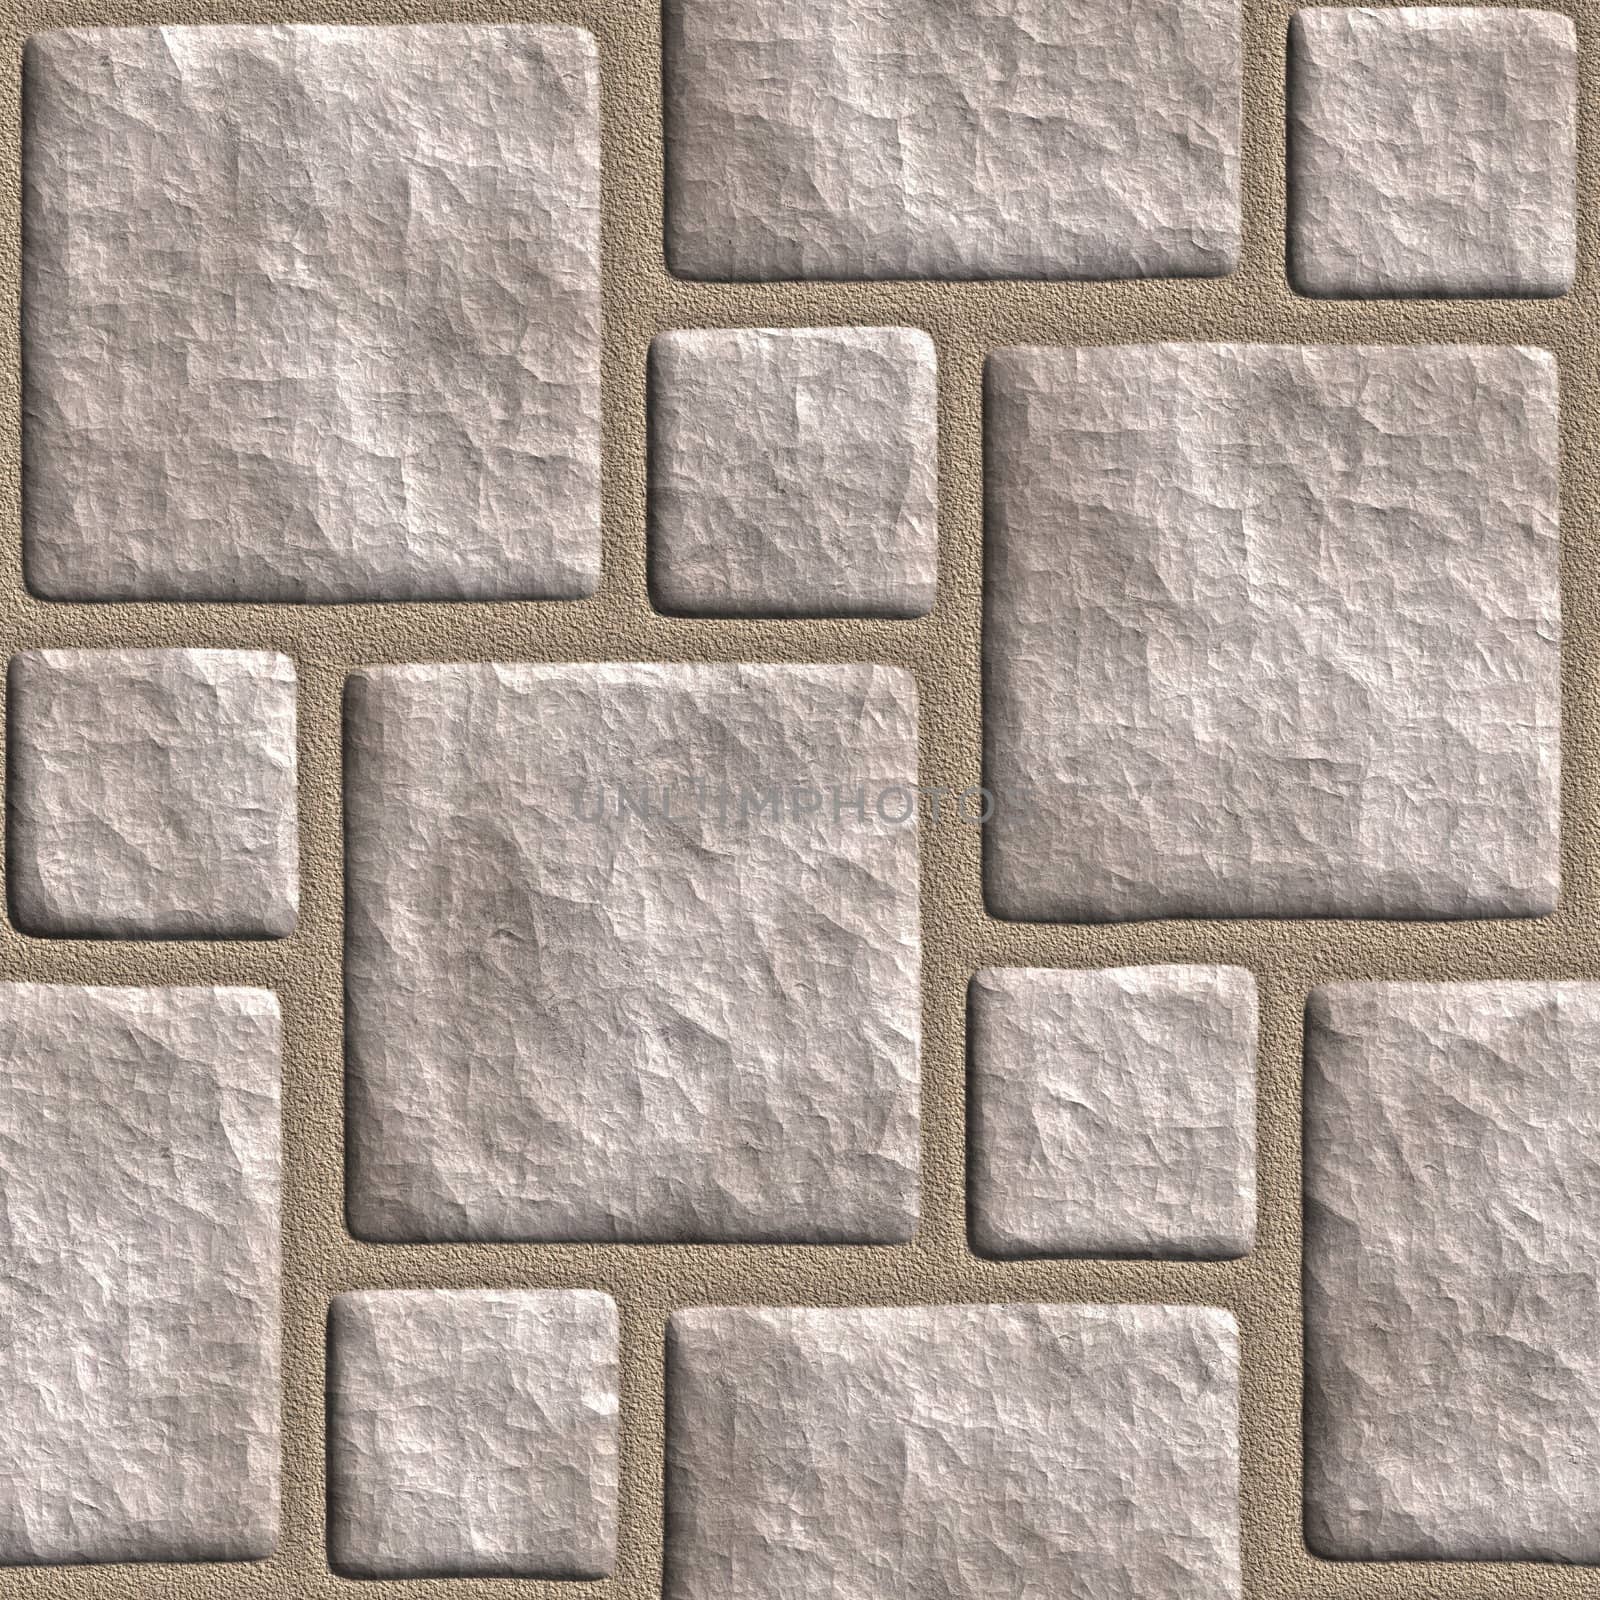 Seamless tileable stonewall background.